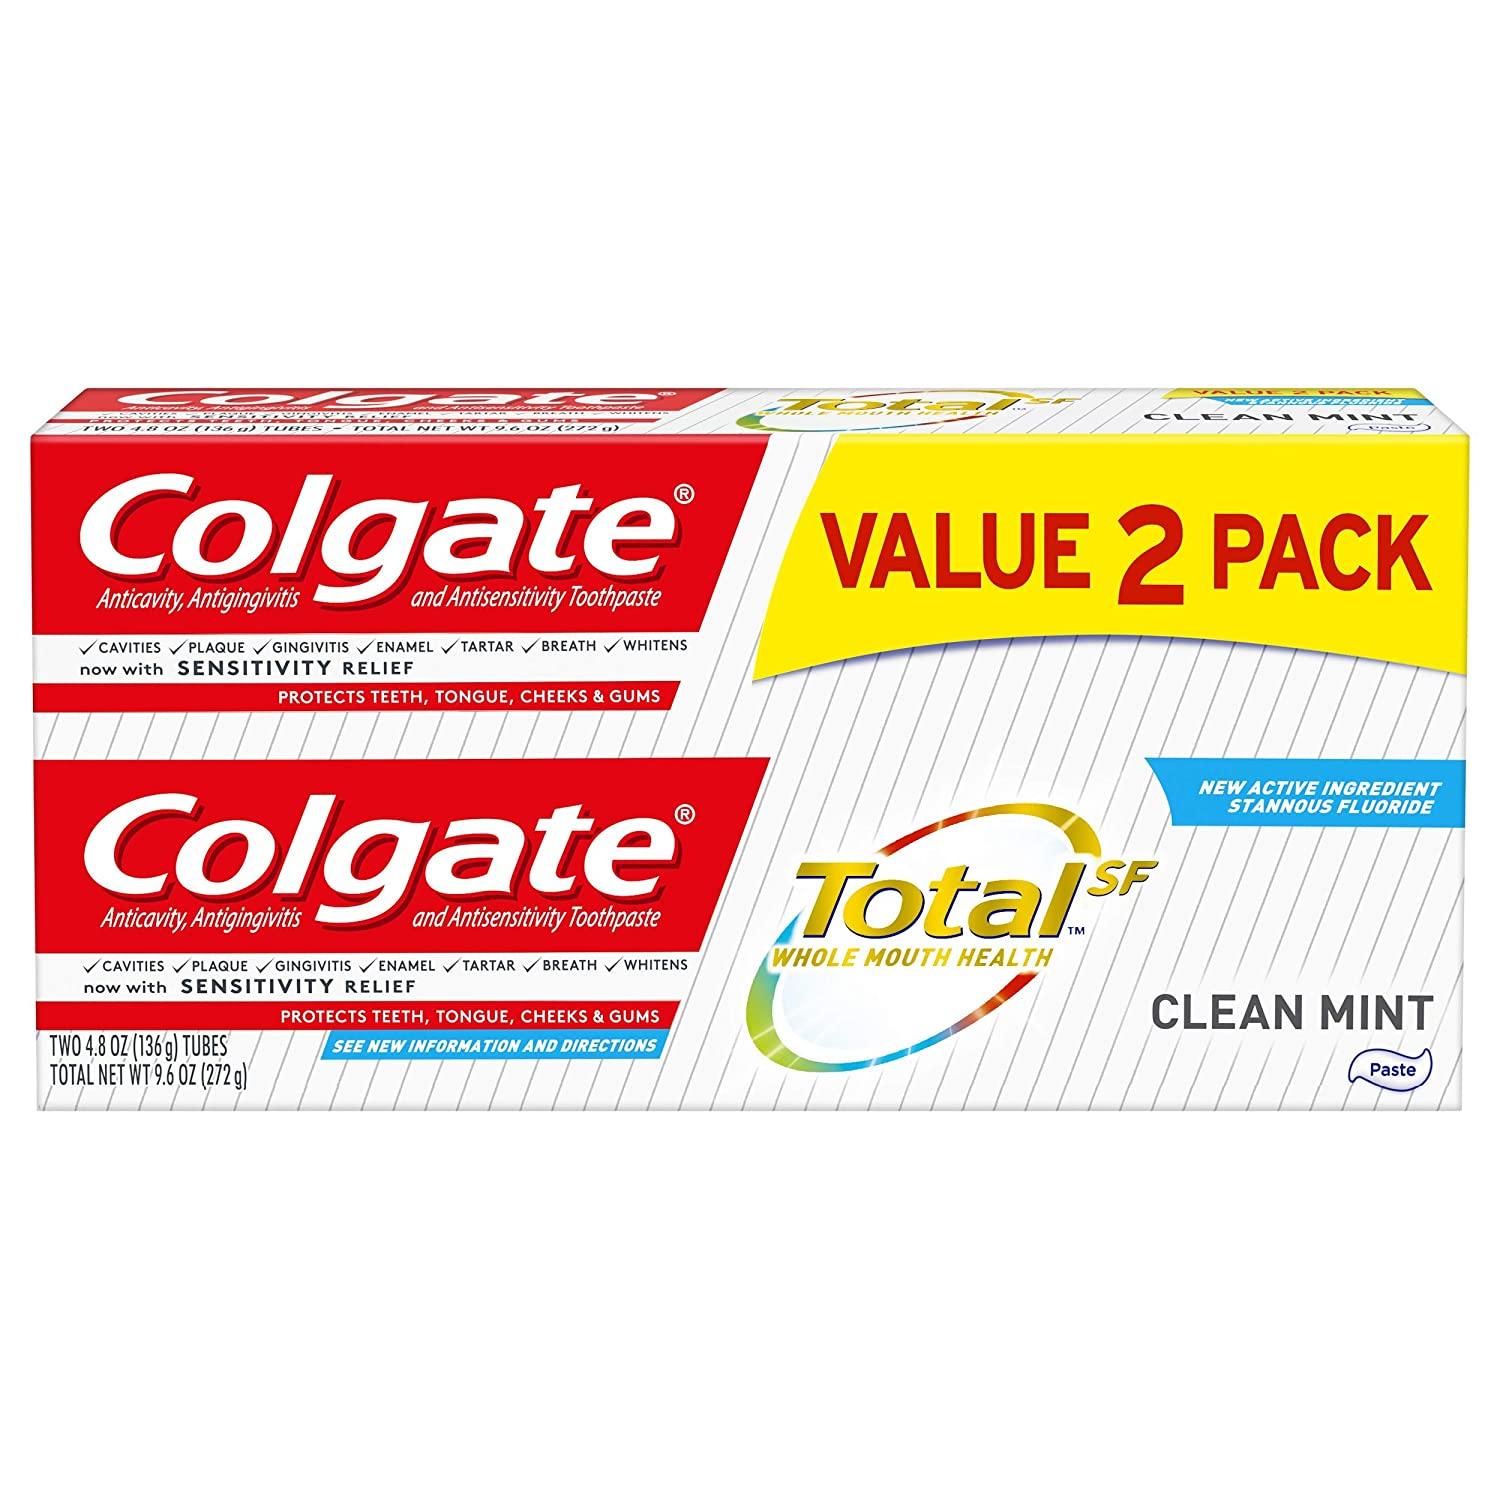 2 Colgate Total Toothpaste with Whitening for $2.14 Shipped